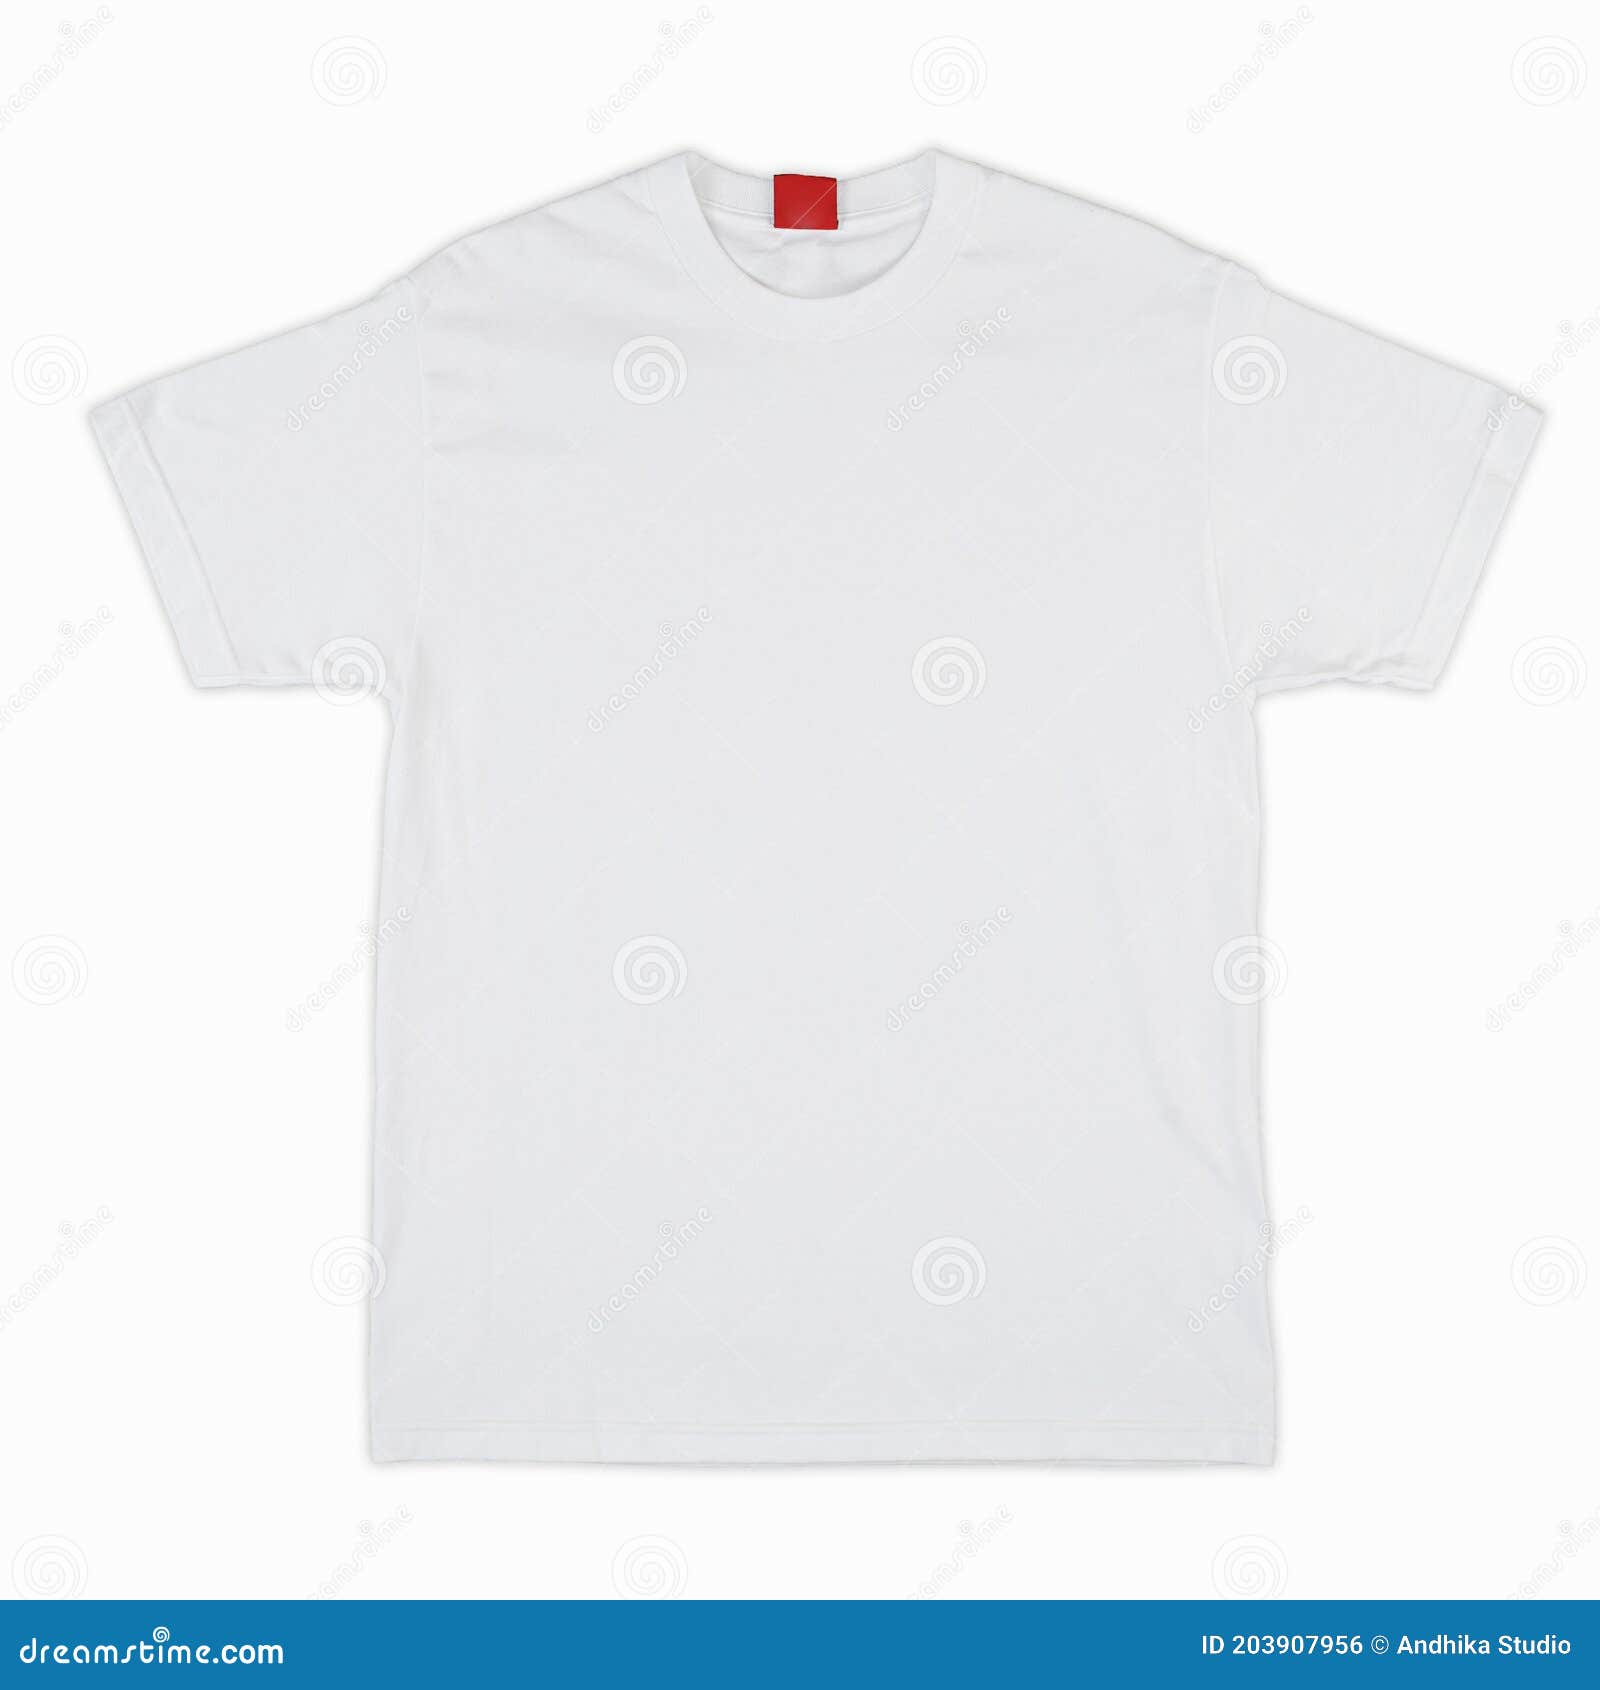 Download 17 751 White Shirt Mock Up Photos Free Royalty Free Stock Photos From Dreamstime